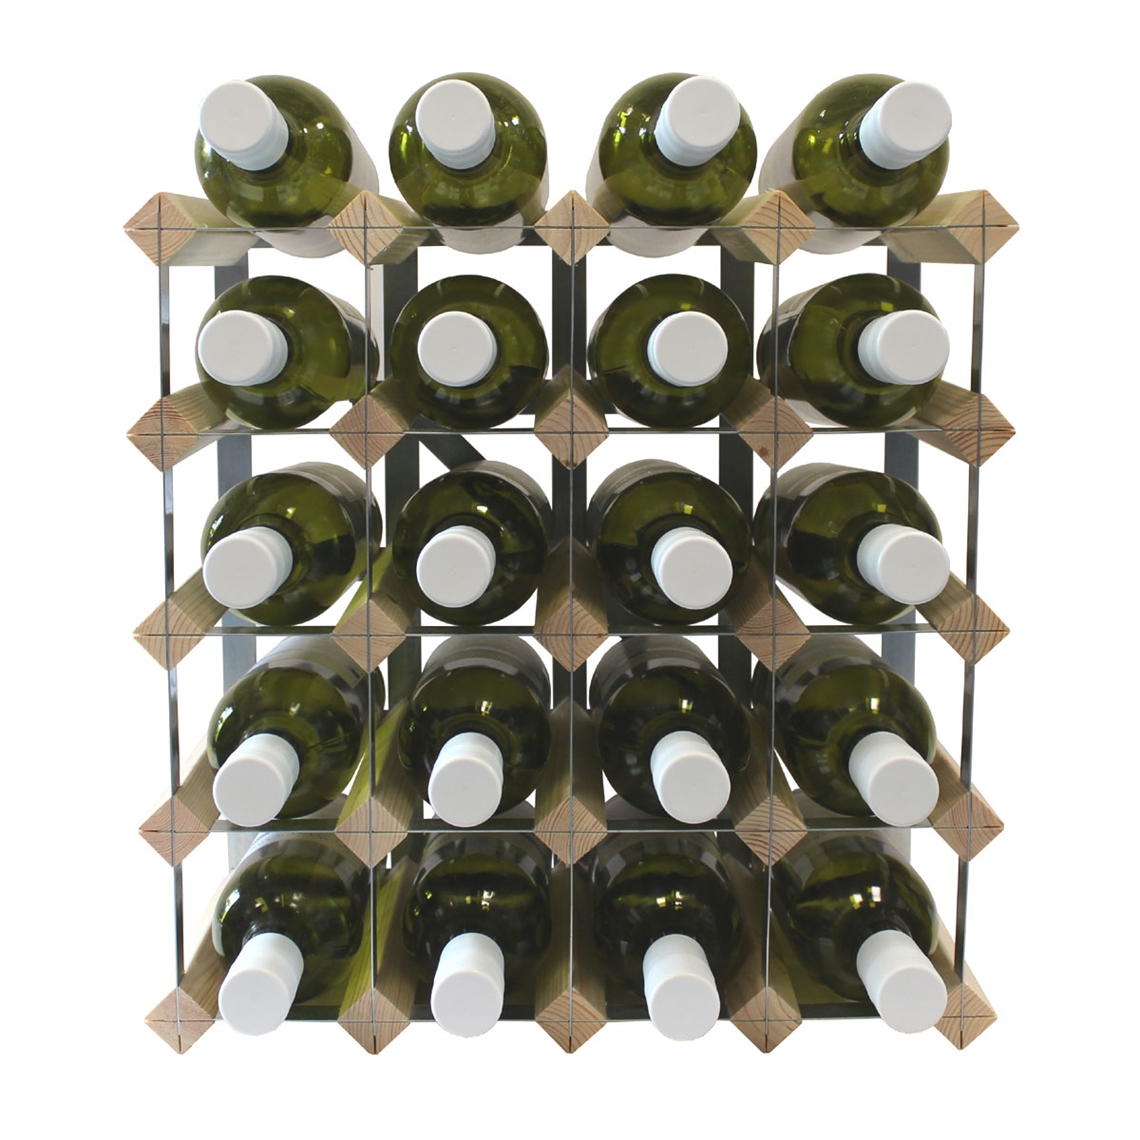 View more self-assembly wine rack buying guide from our Assembled Wine Racks range